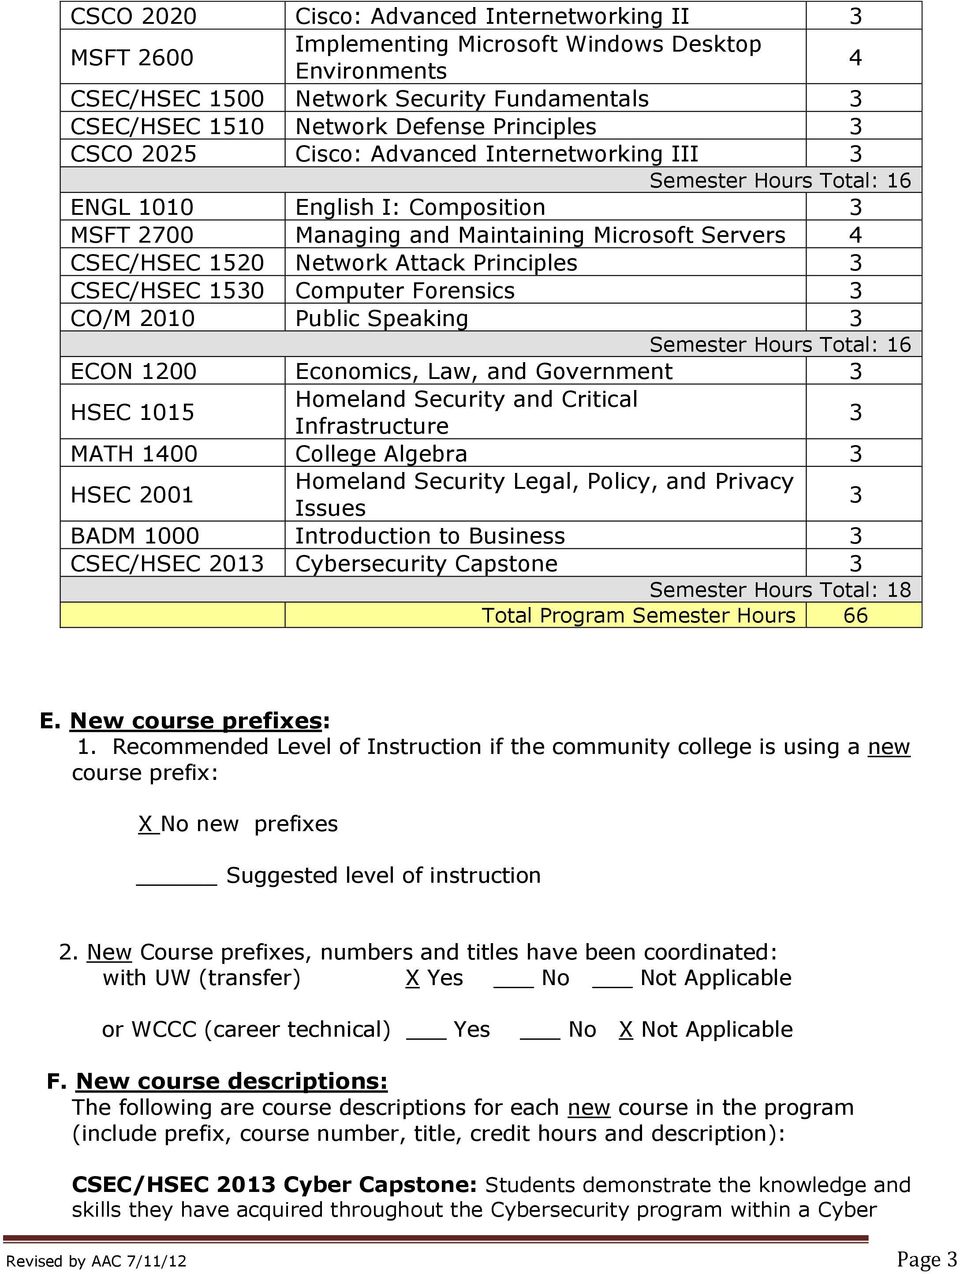 Principles 3 CSEC/HSEC 1530 Computer Forensics 3 CO/M 2010 Public Speaking 3 Semester Hours Total: 16 ECON 1200 Economics, Law, and Government 3 HSEC 1015 Homeland Security and Critical